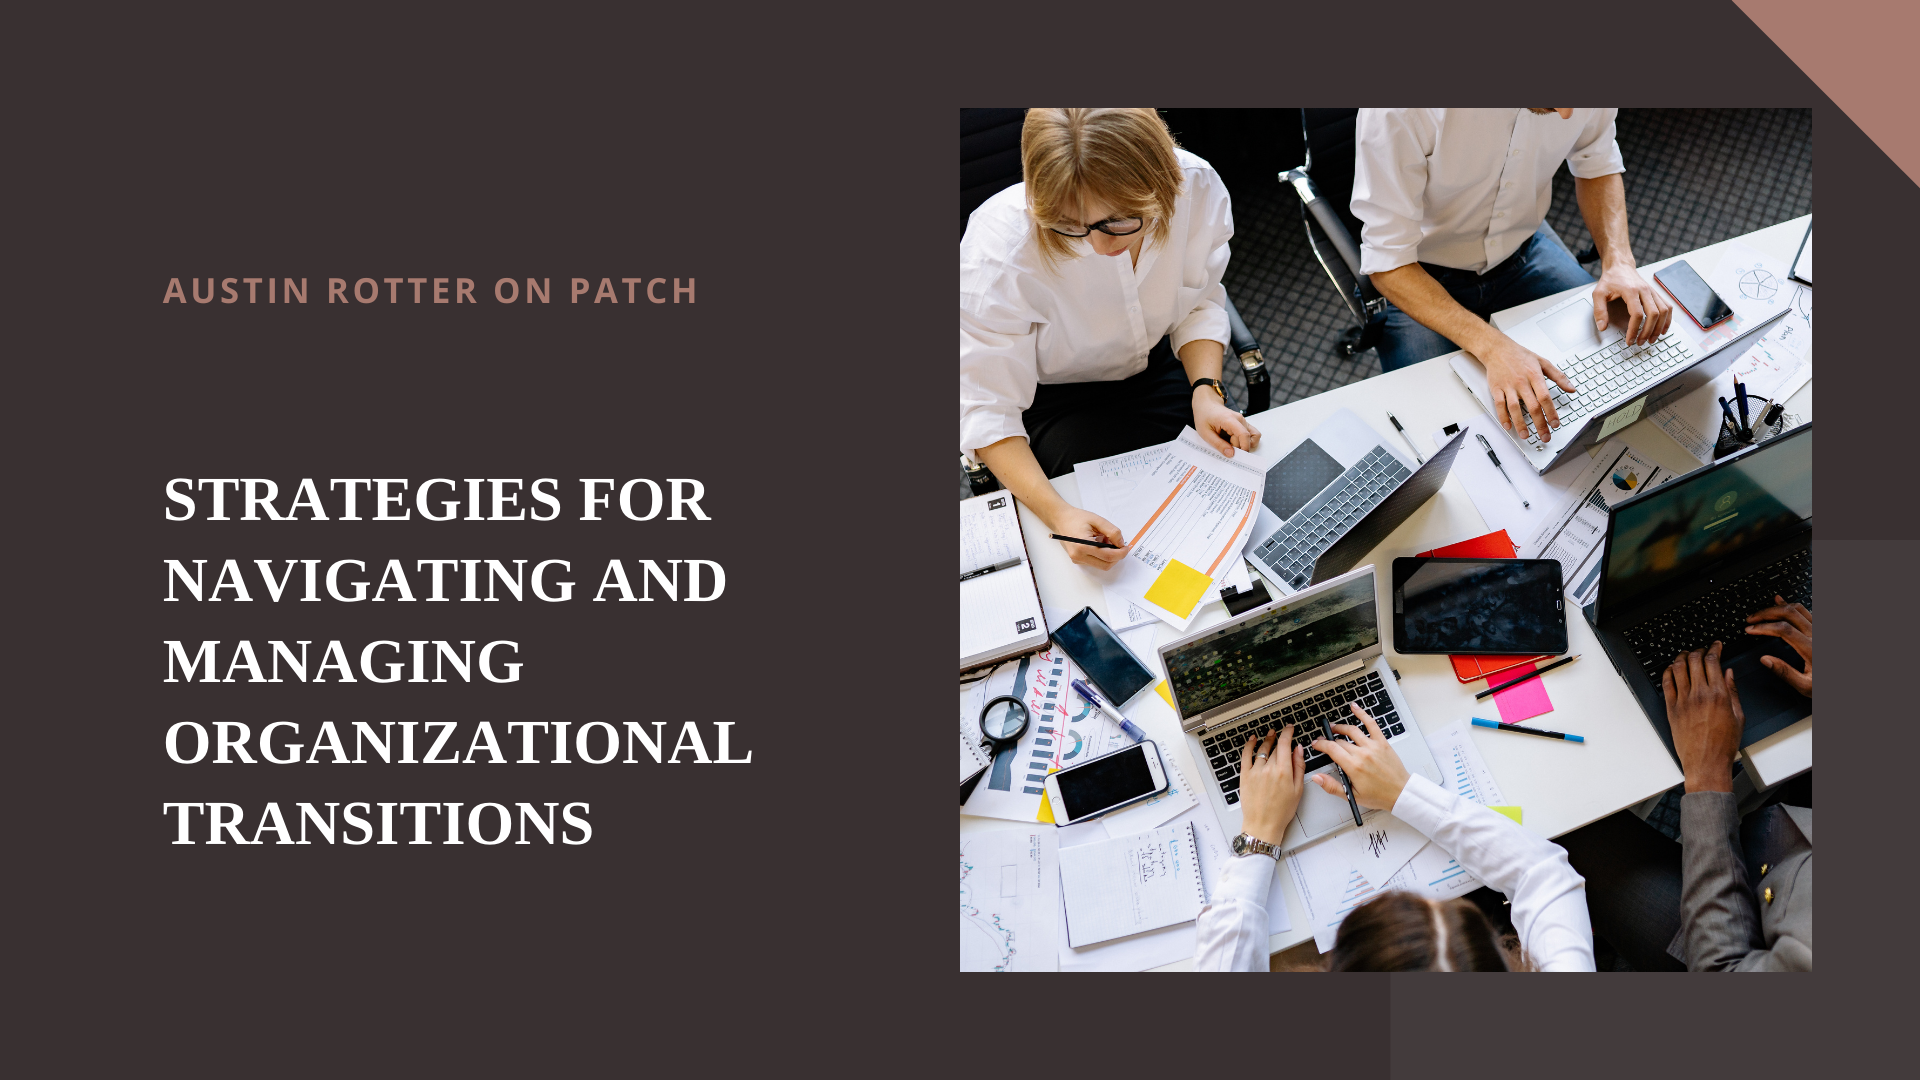 AUSTIN ROTTER ON PATCH

STRATEGIES FOR
NAVIGATING AND
MANAGING
ORGANIZATIONAL
TRANSITIONS